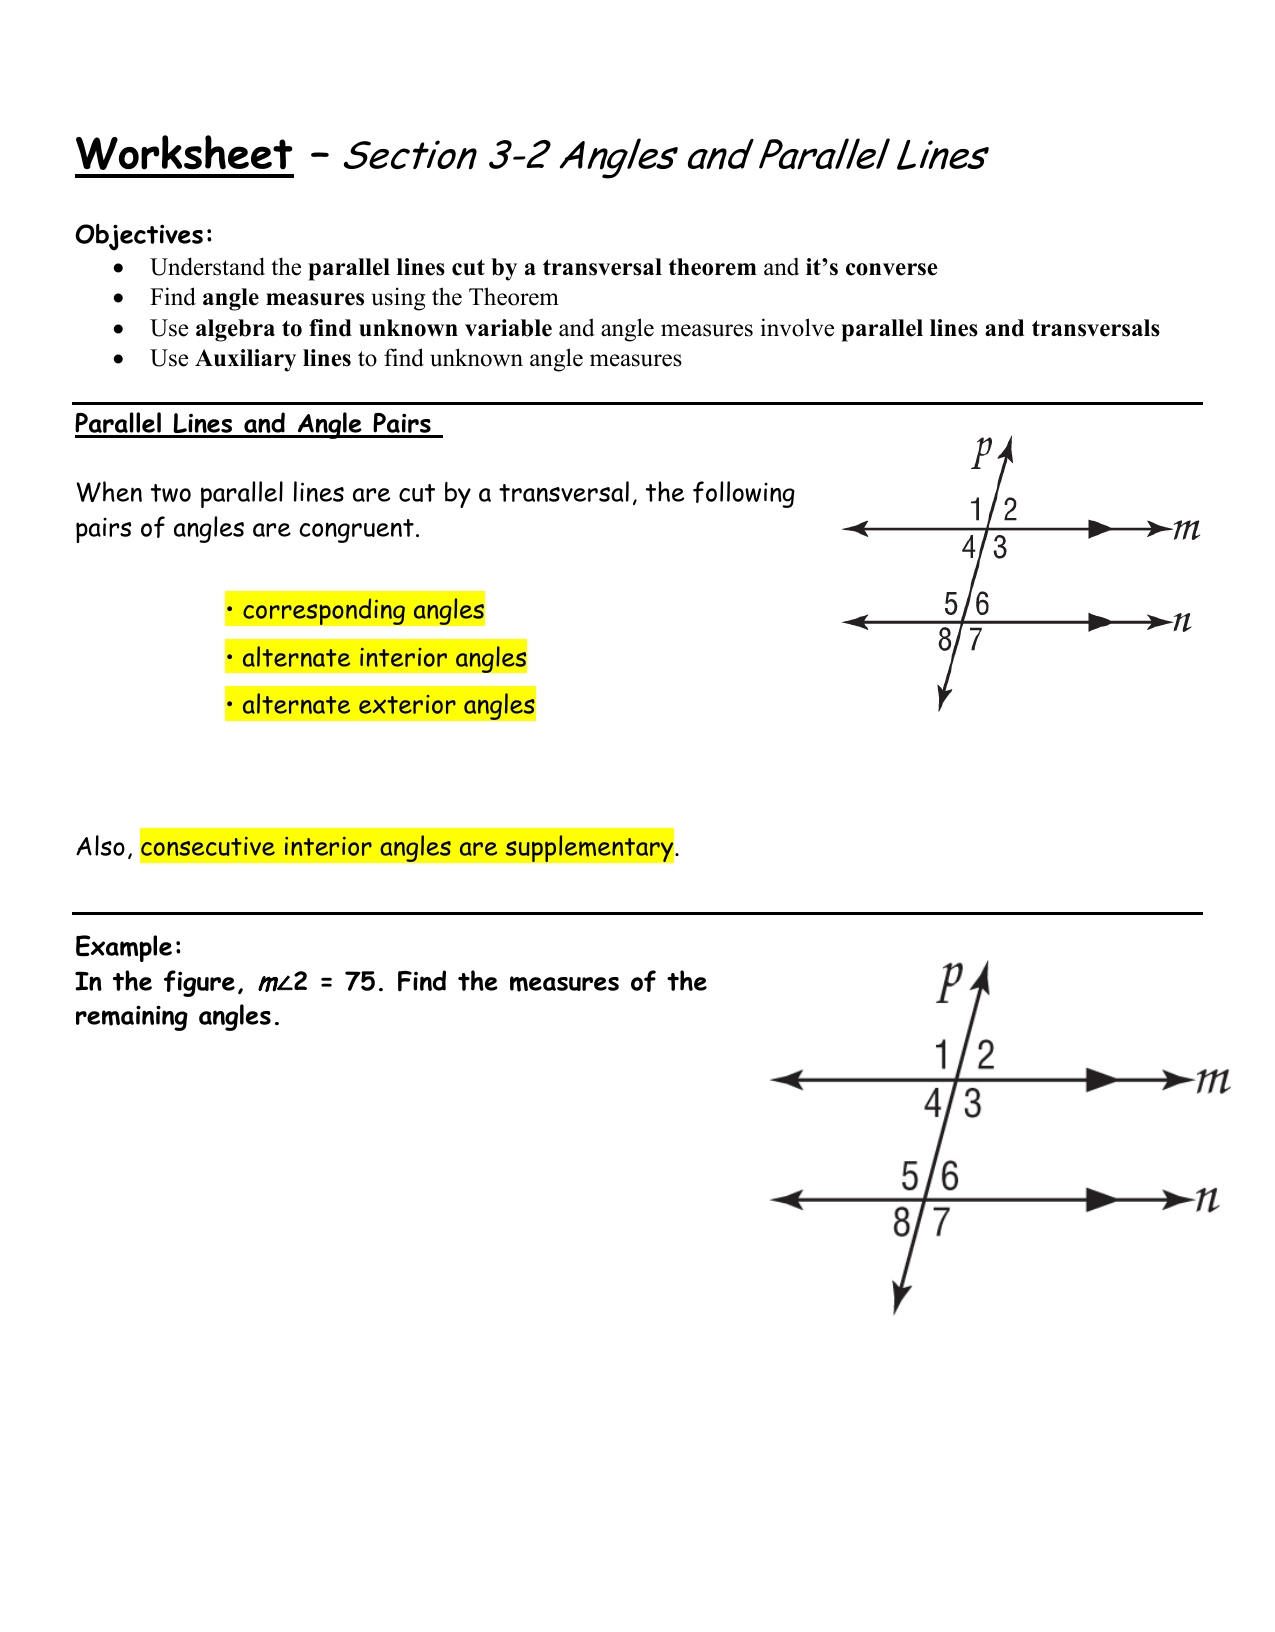 Worksheet Section 21 Angles and Parallel Lines With Regard To Parallel Lines Transversal Worksheet